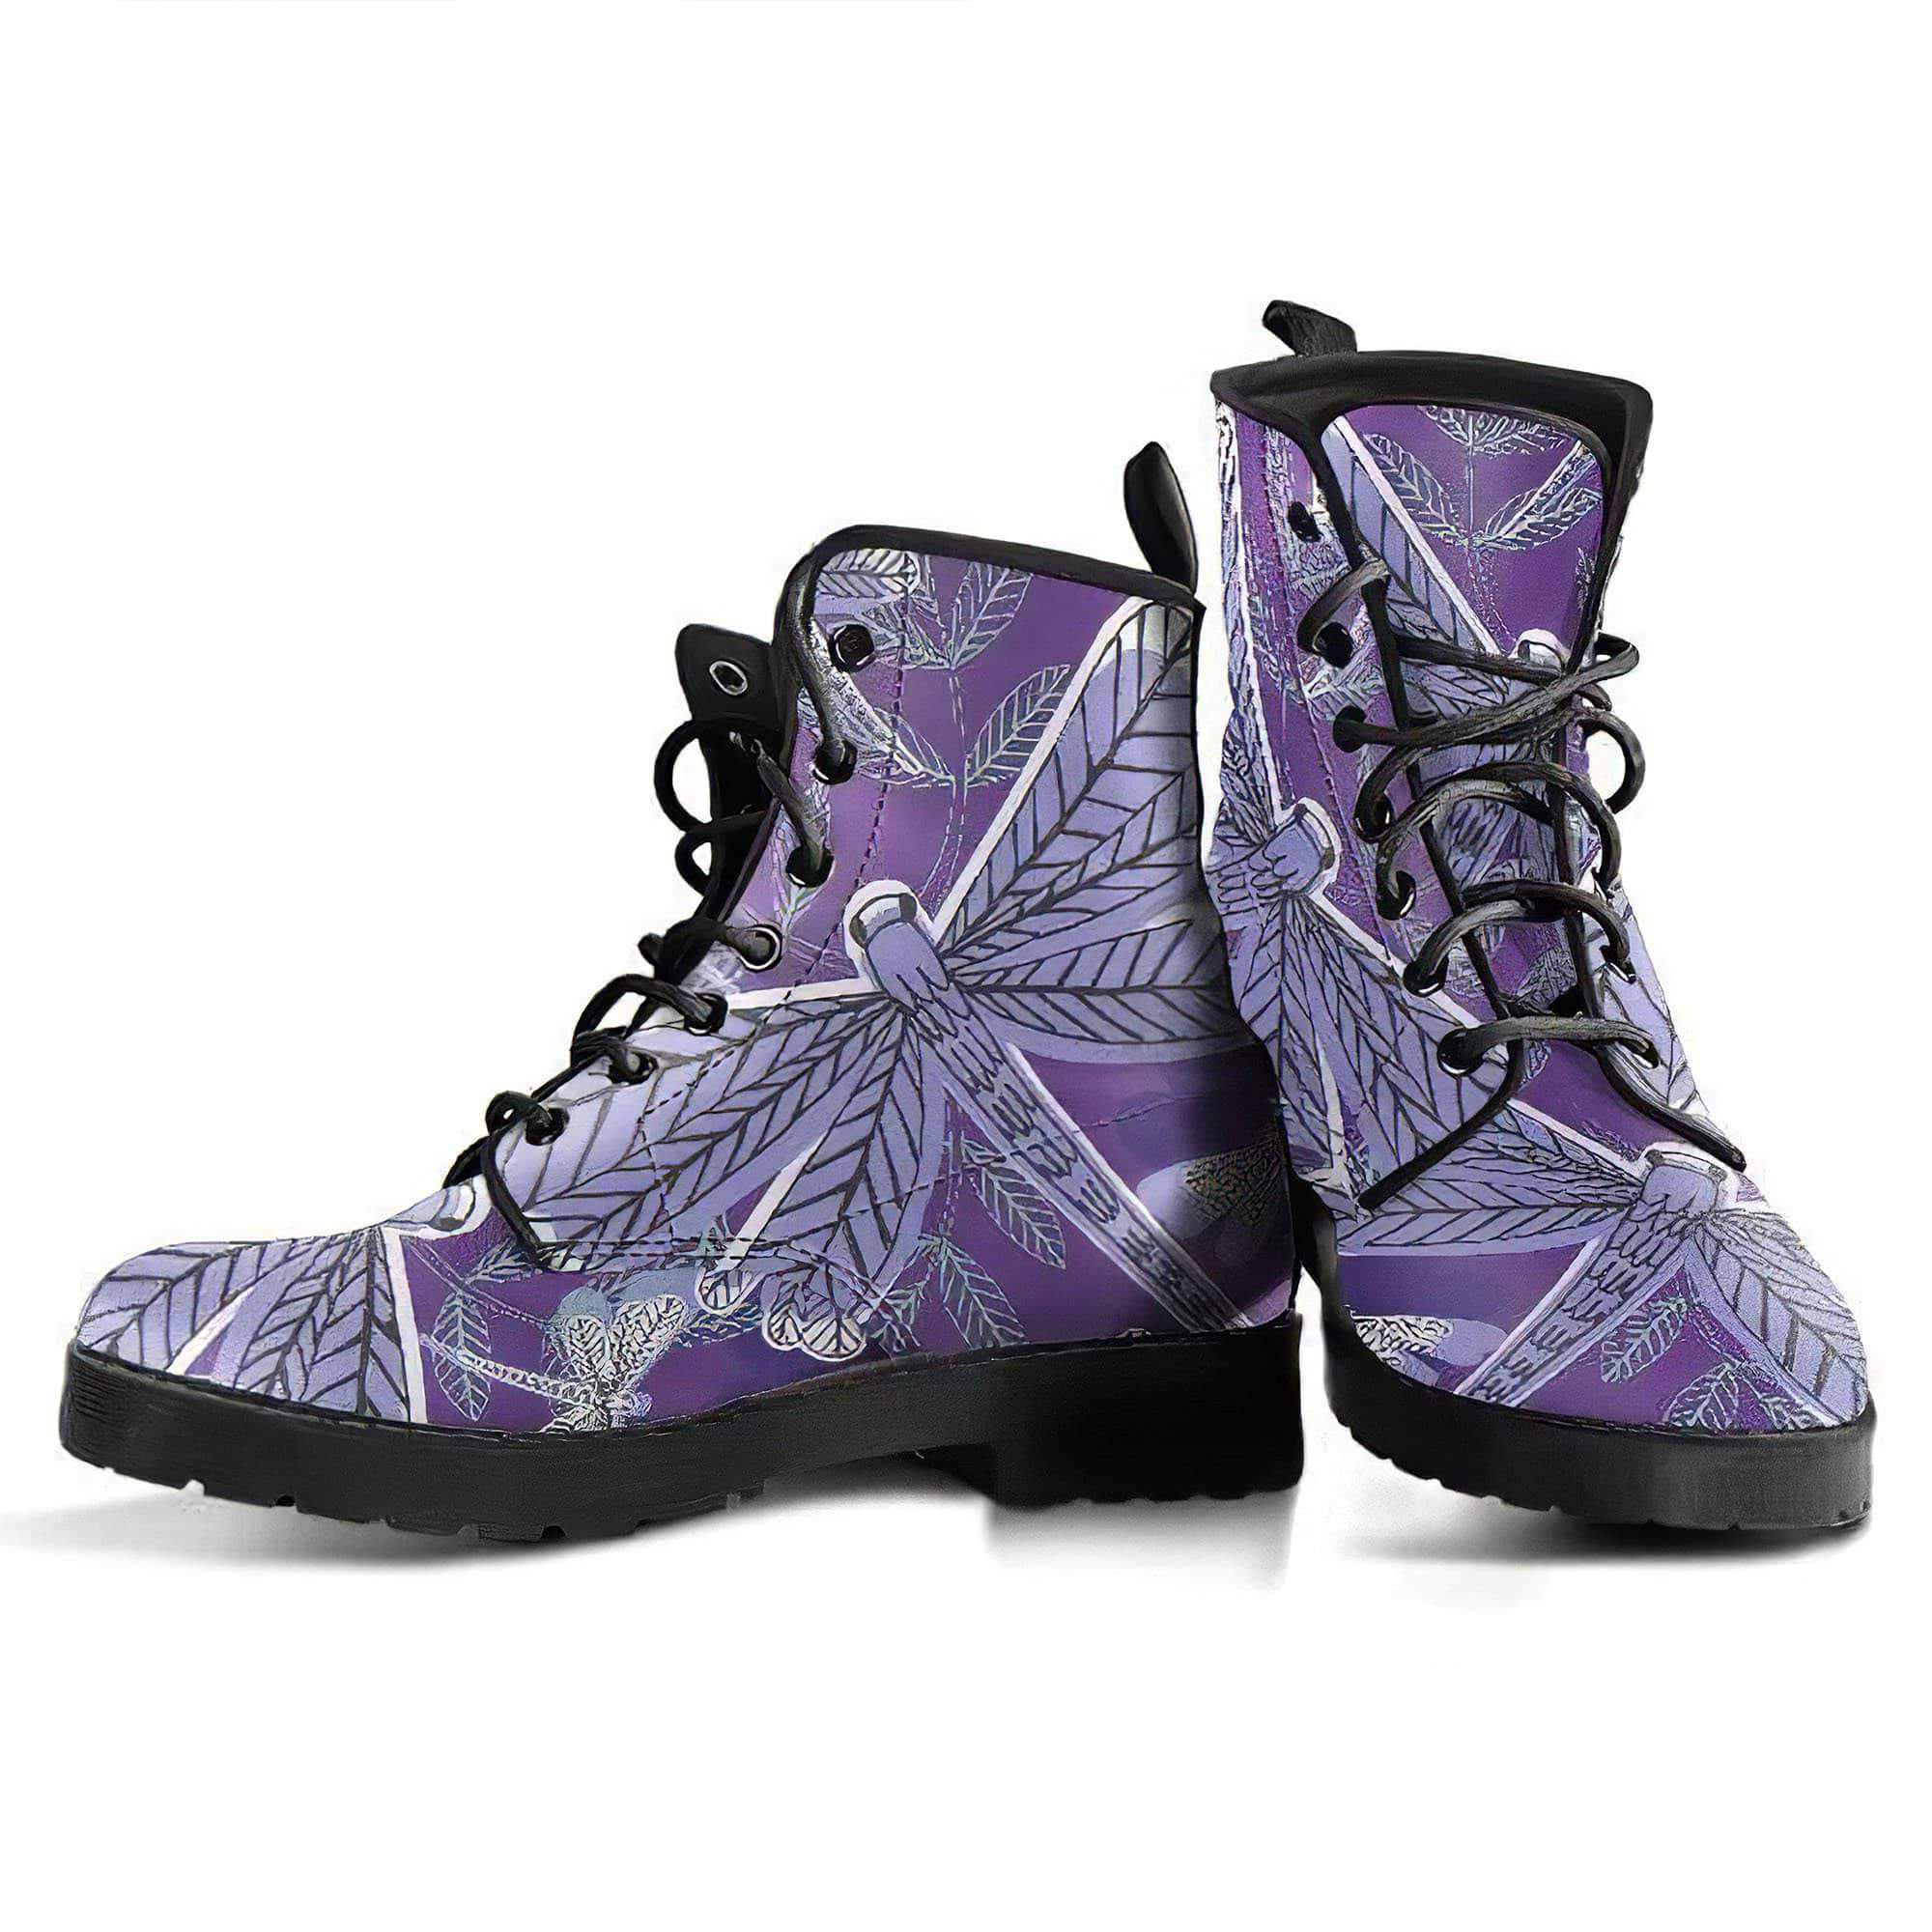 purple-dragonfly-handcrafted-boots-women-s-leather-boots-12051933626429.jpg